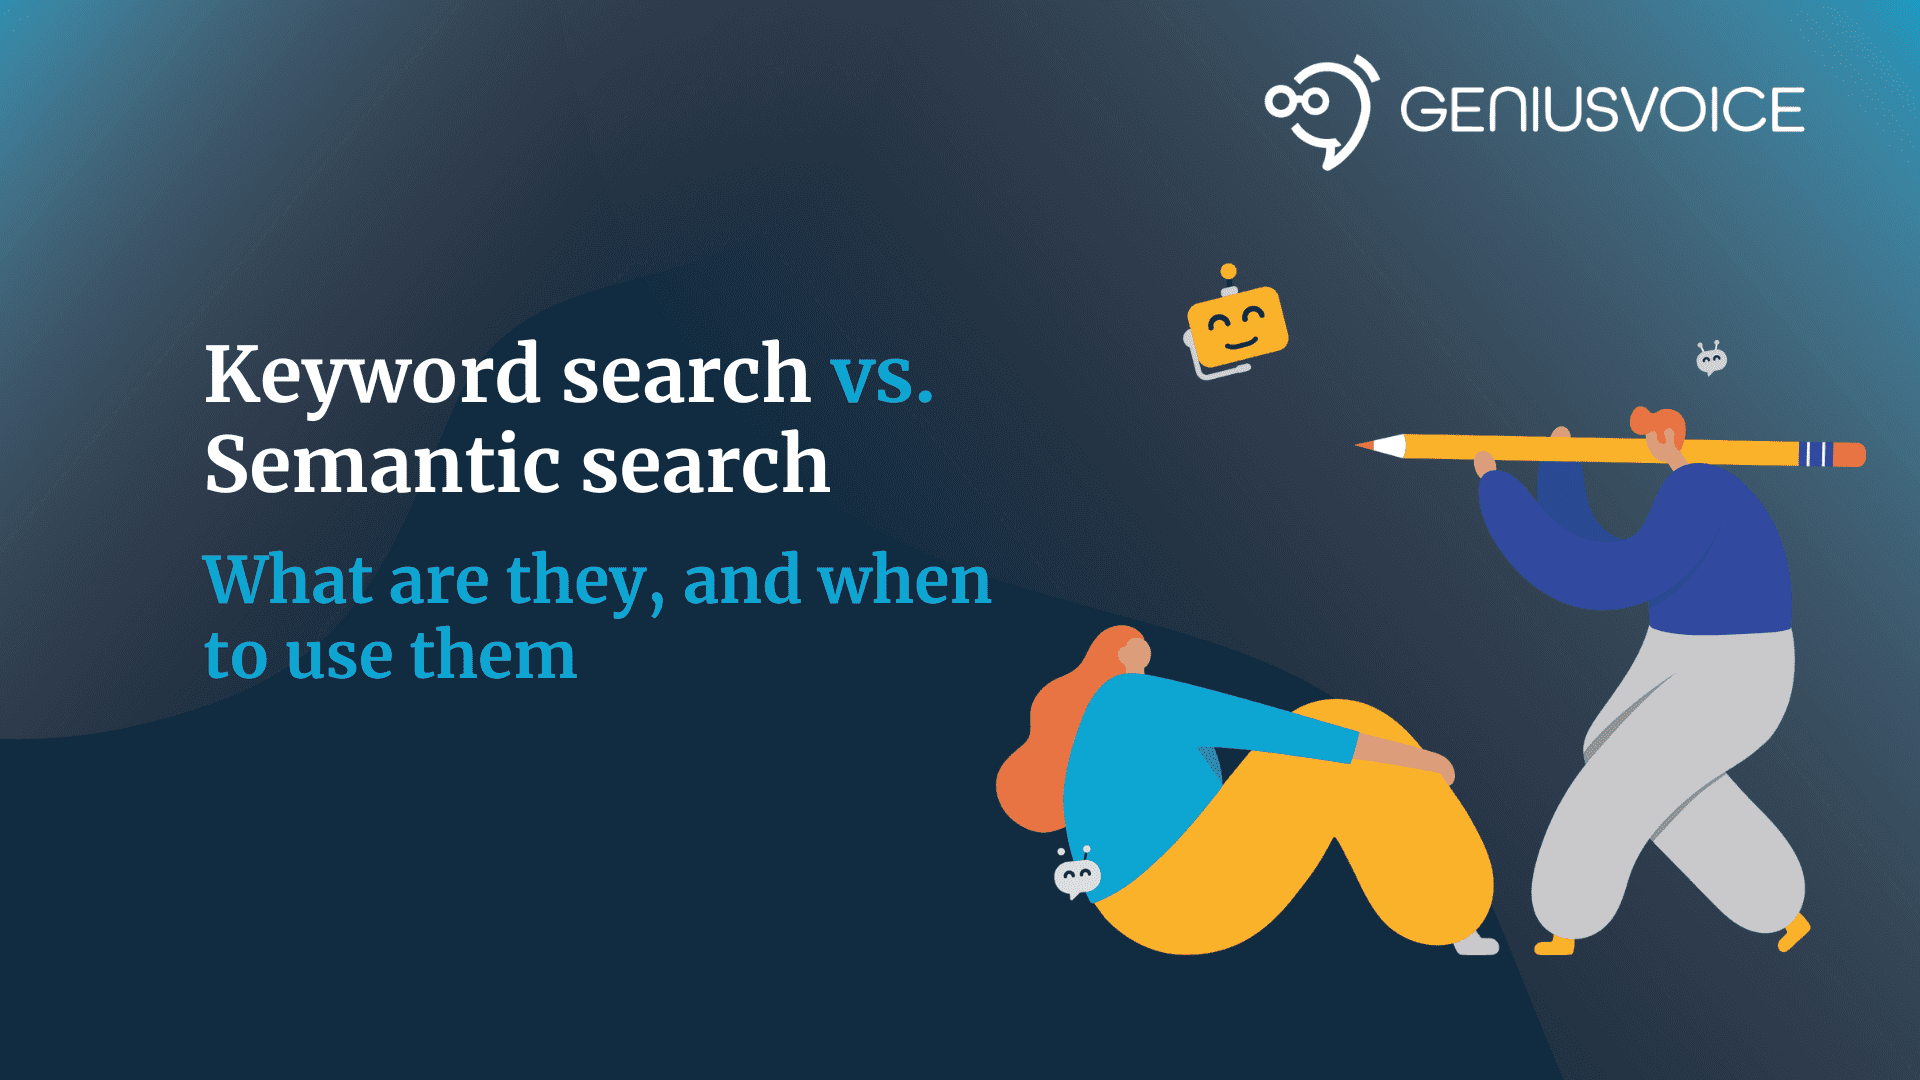 Keyword search vs. semantic search. What are they, and when